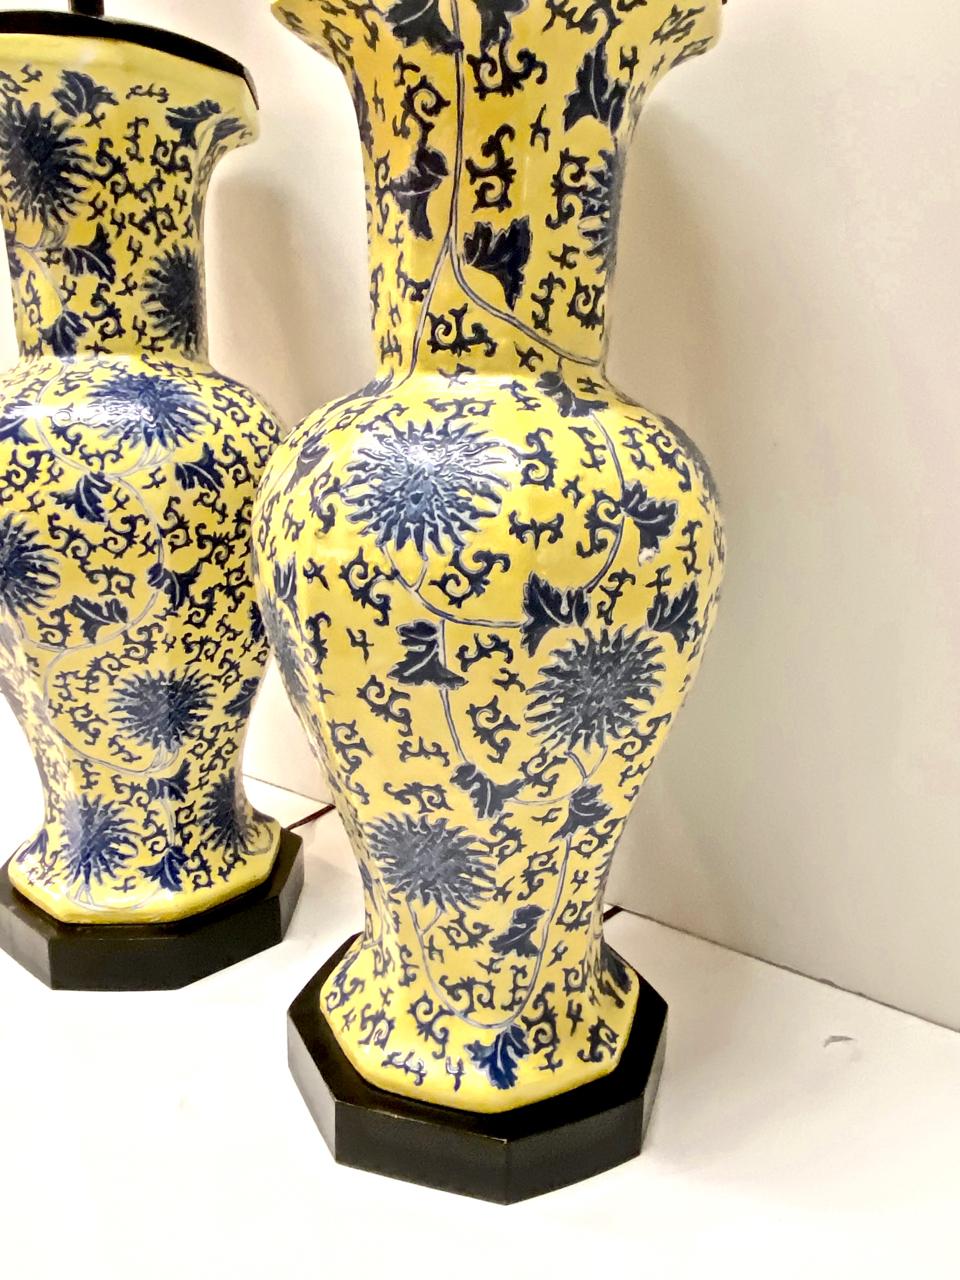 This is an exceptional pair of blue and yellow porcelain chinoiserie table lamps that date to the second half of the 20th century. The 8-sided ceramic bases are fitted with octagonal lacquered wood plinths and double cluster lighting elements. The